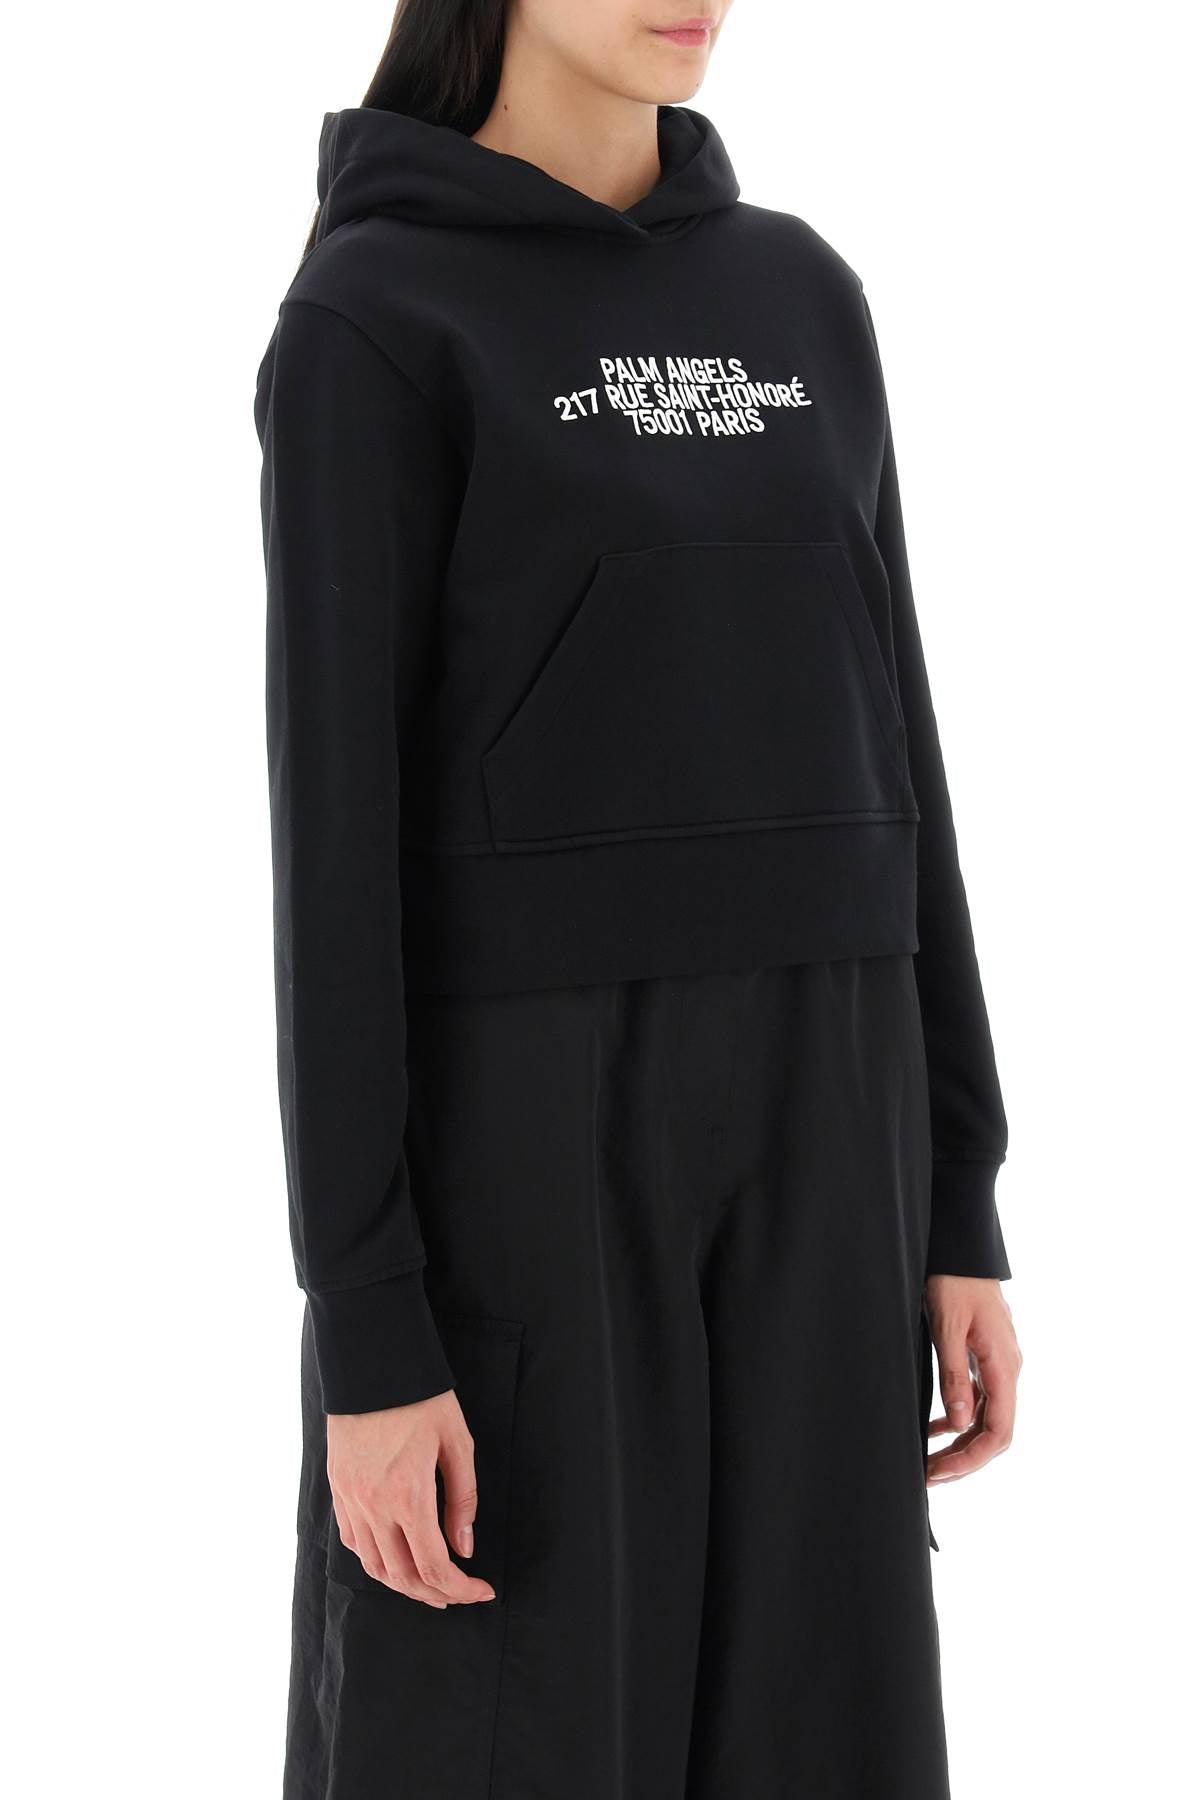 Palm angels cropped hoodie with embroidery-1